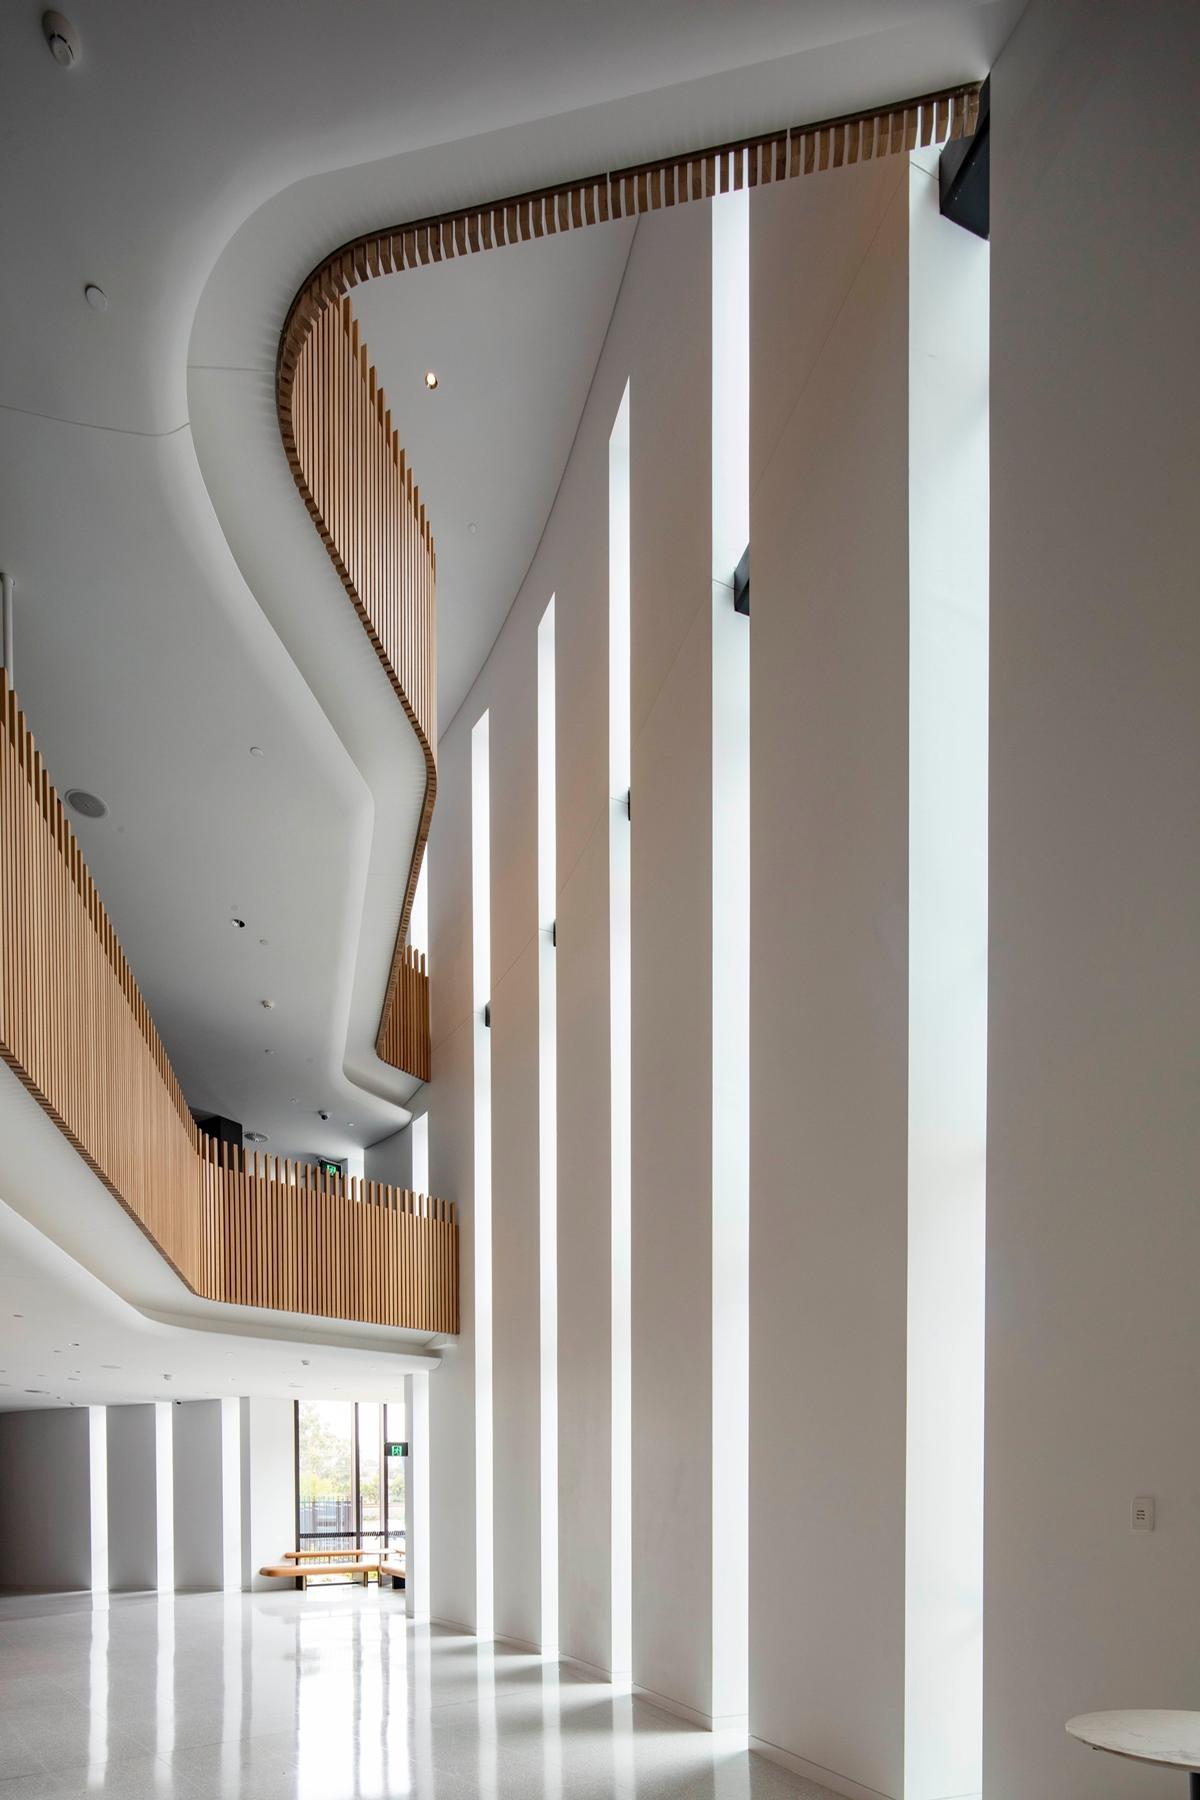 Natural light floods in through tall openings in the building's envelope / John Gollings